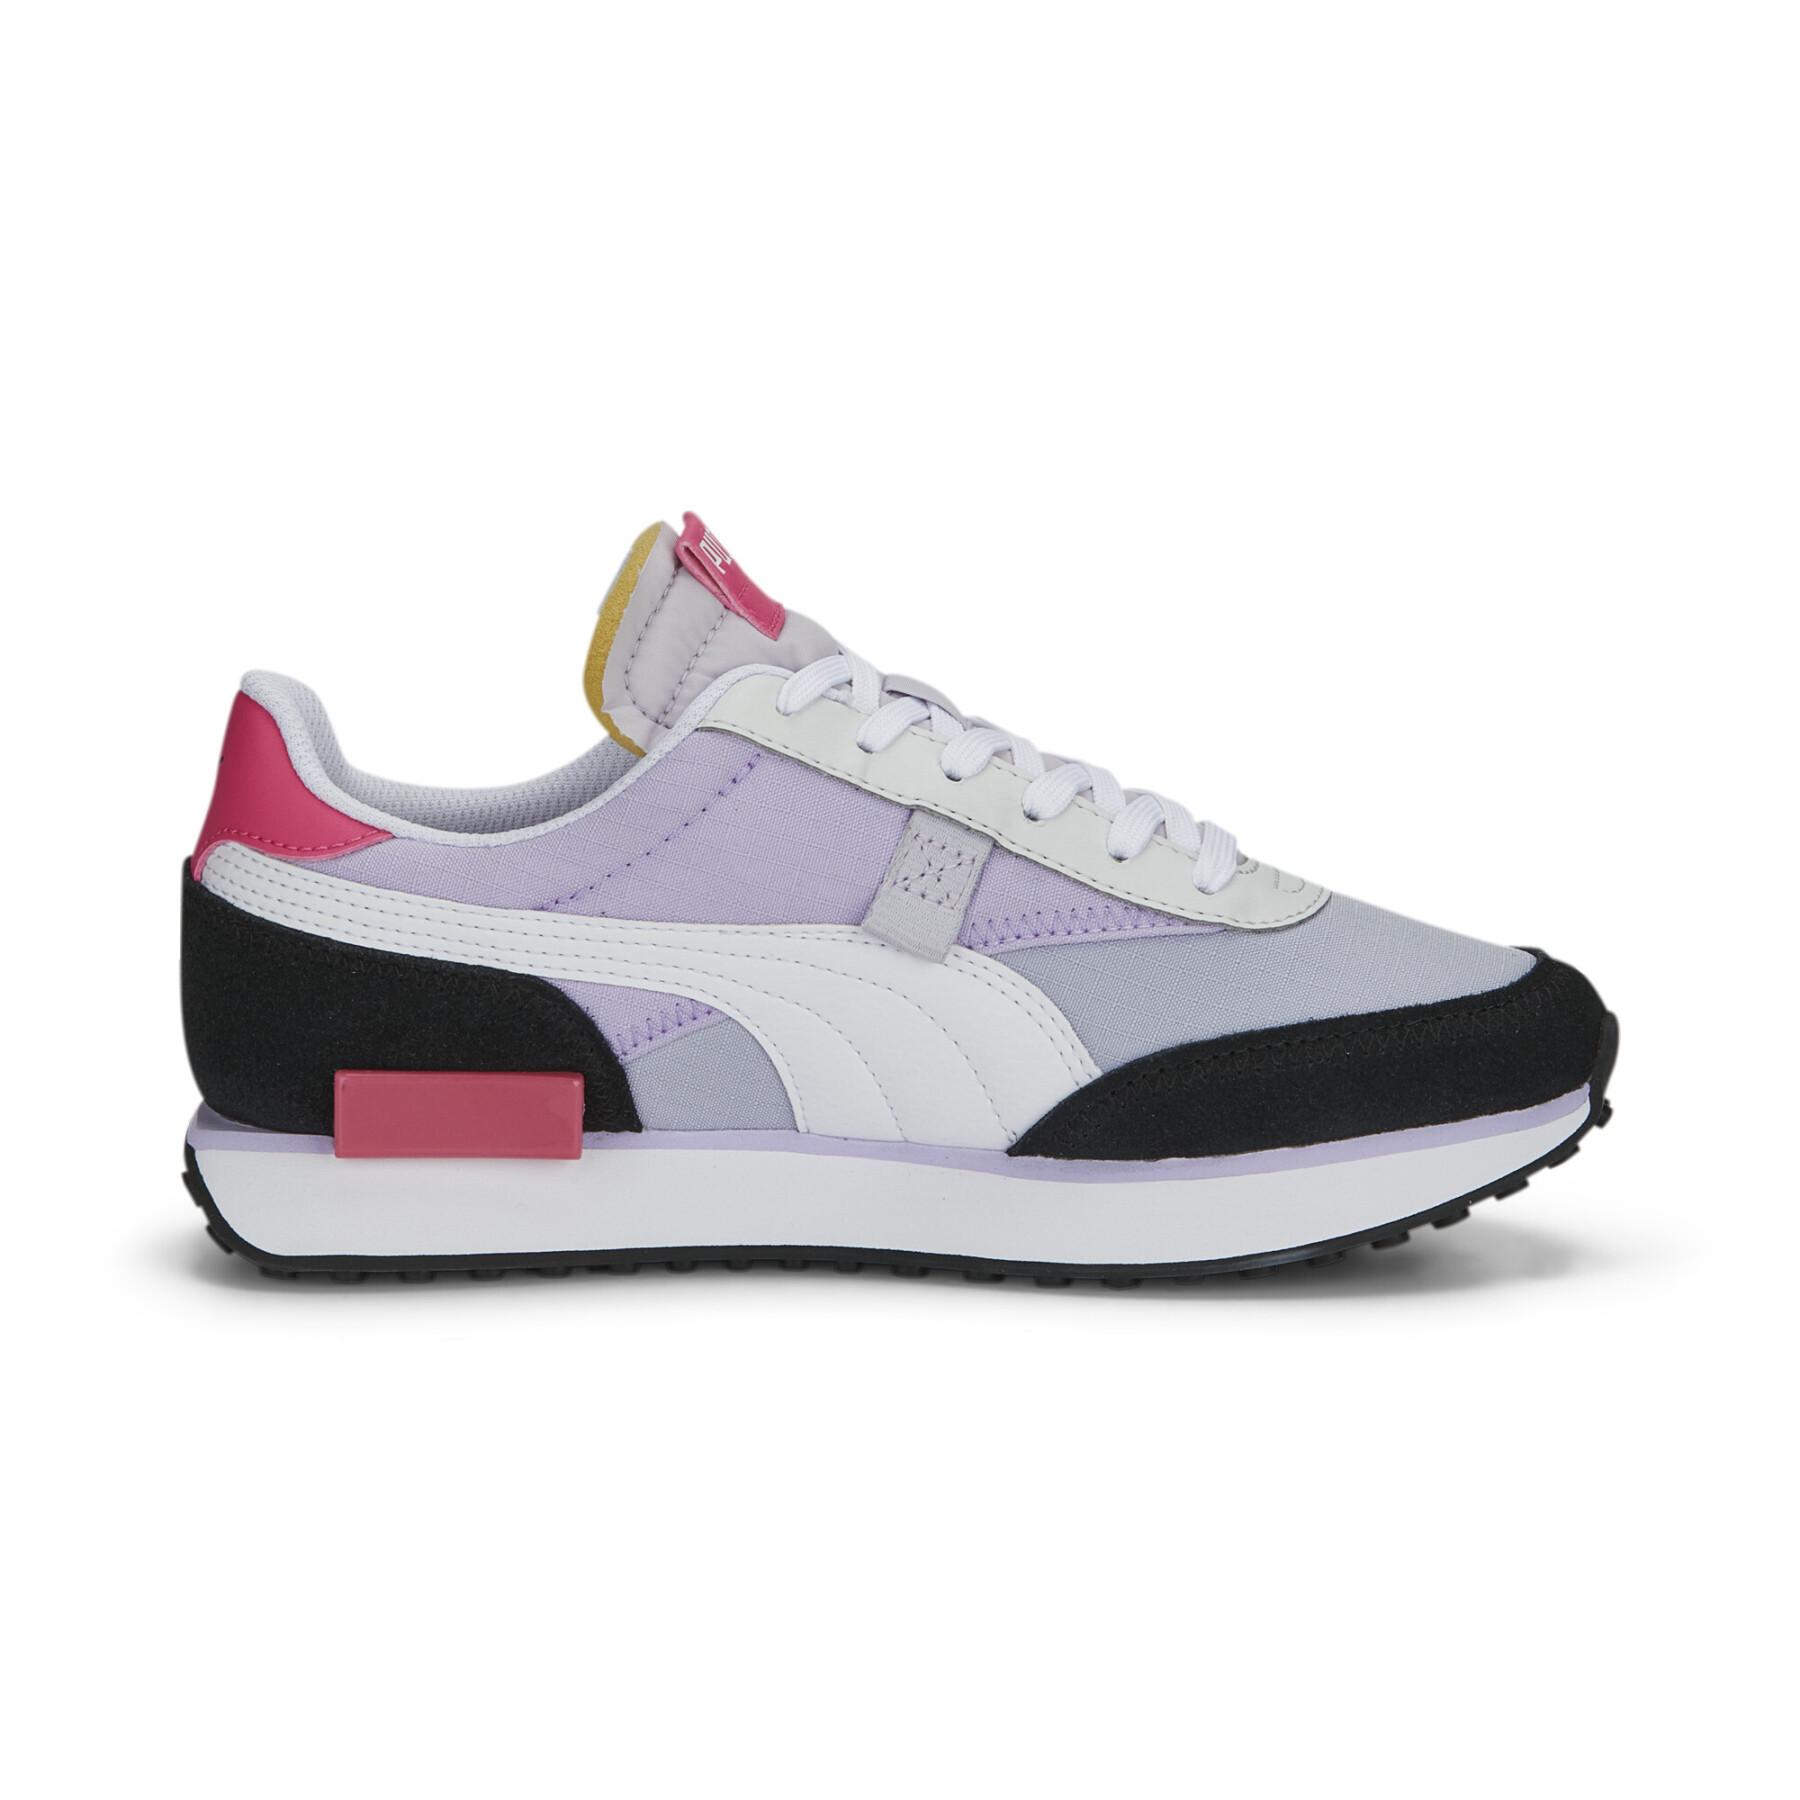 Formadores Puma Rider Play On